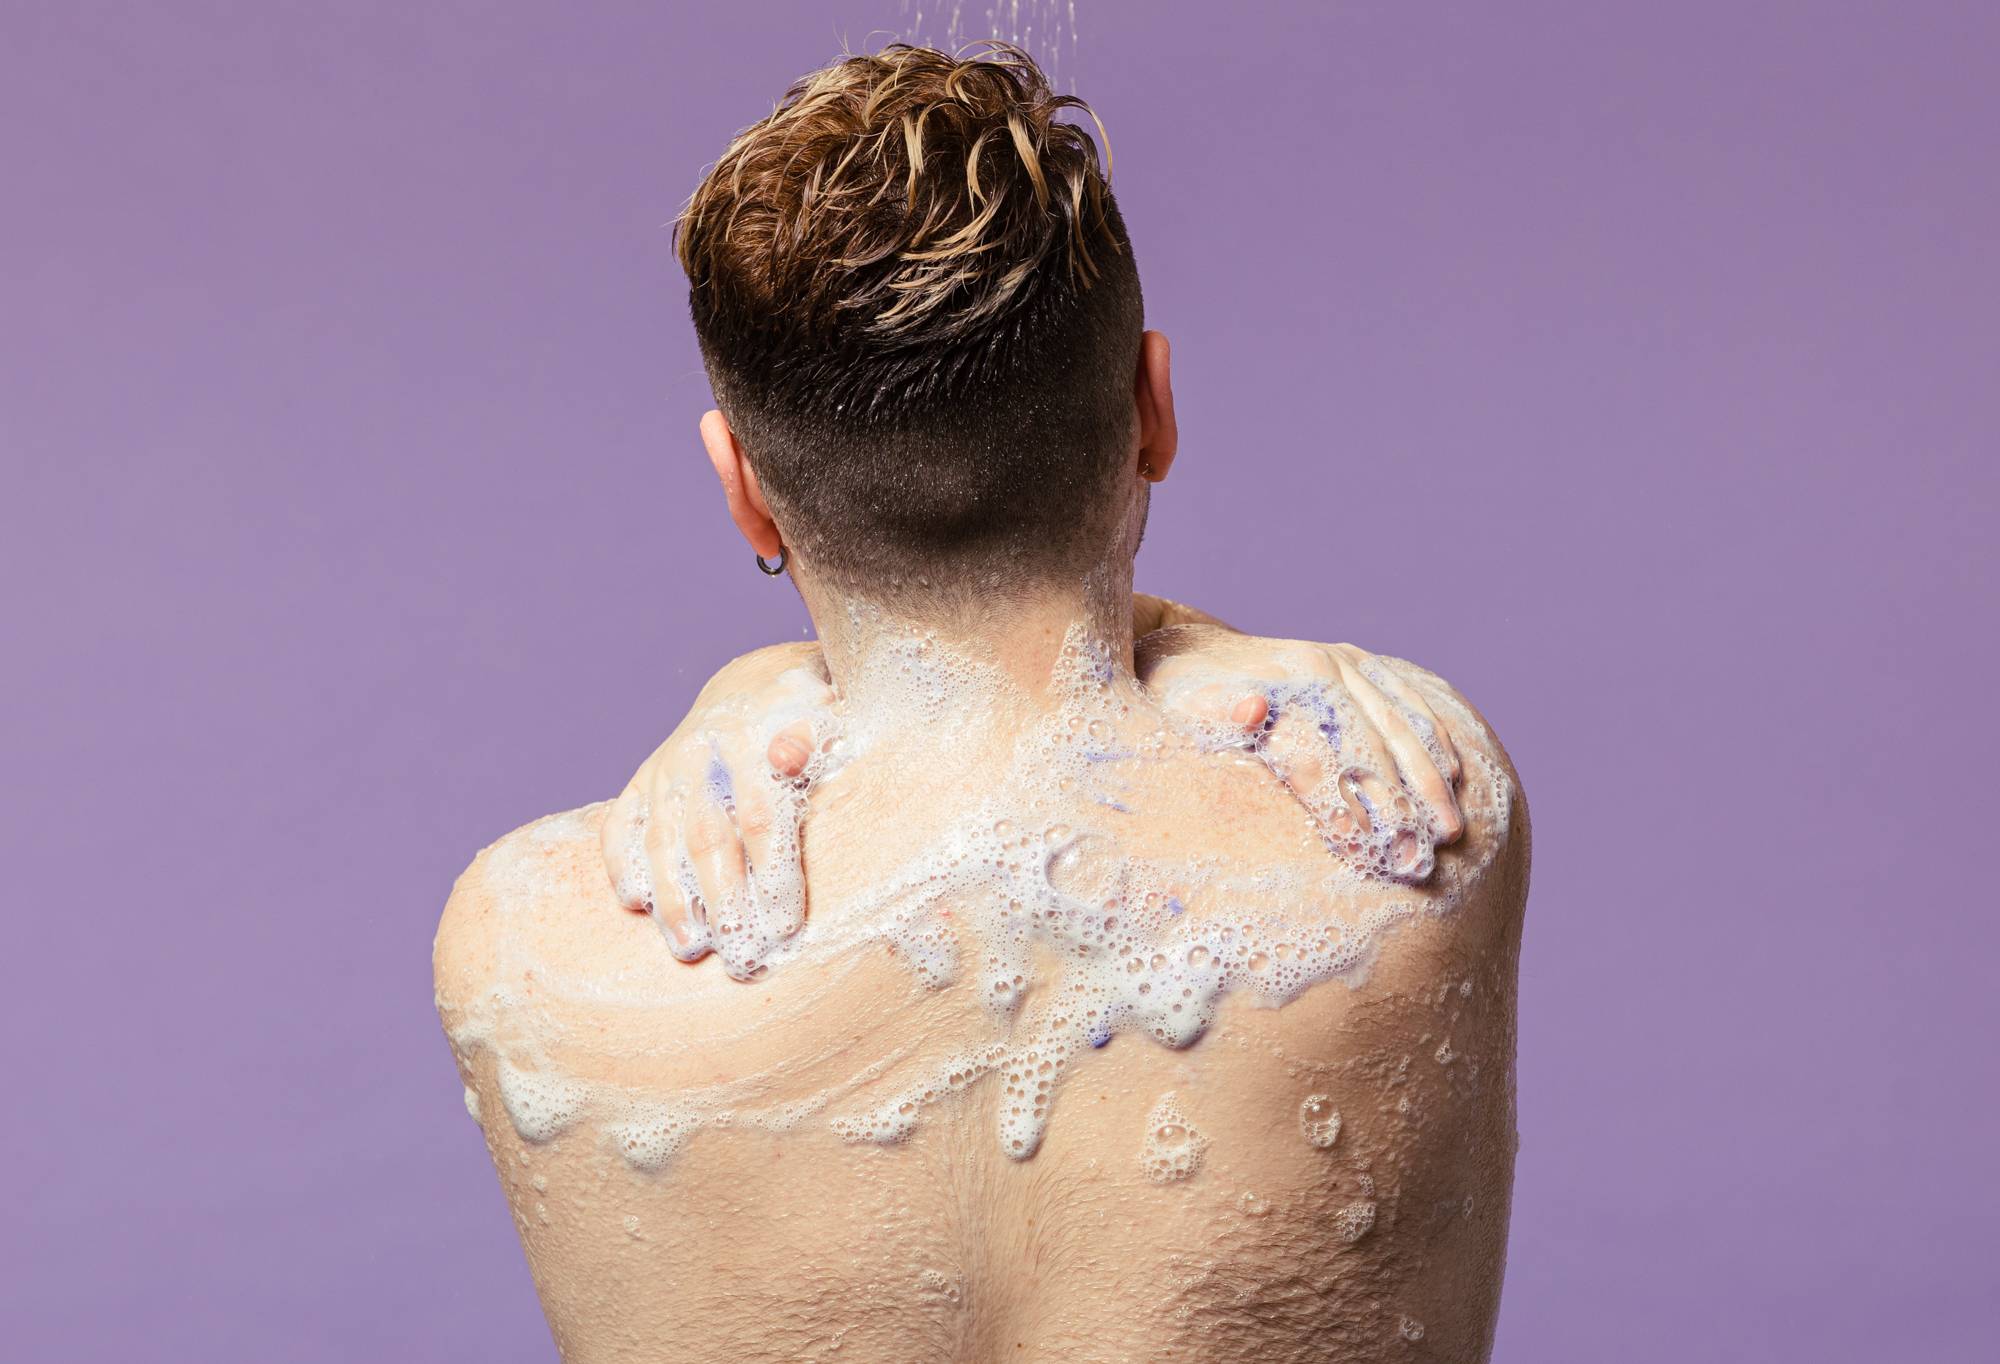 A model stands with upper back and head shown, lather running down from hands over their neck, in front of a purple background.